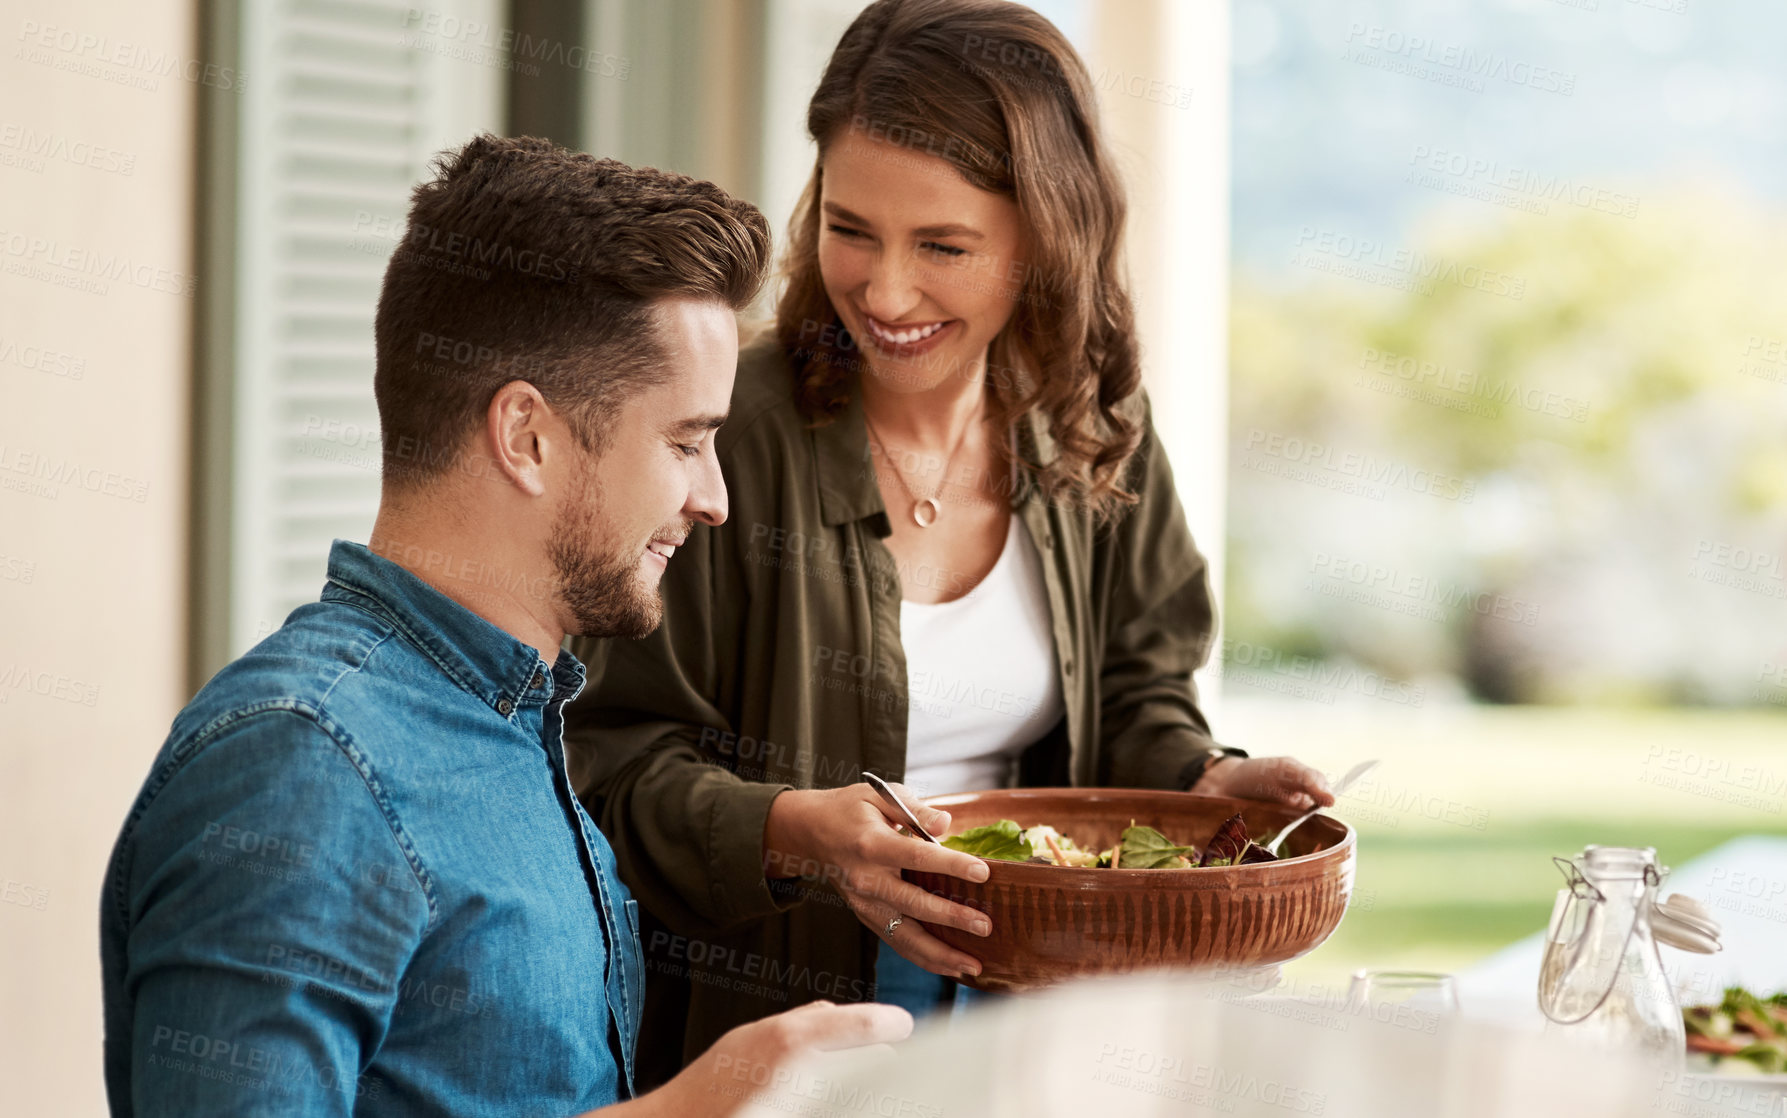 Buy stock photo Cropped shot of a couple enjoying a meal together in the yard at home